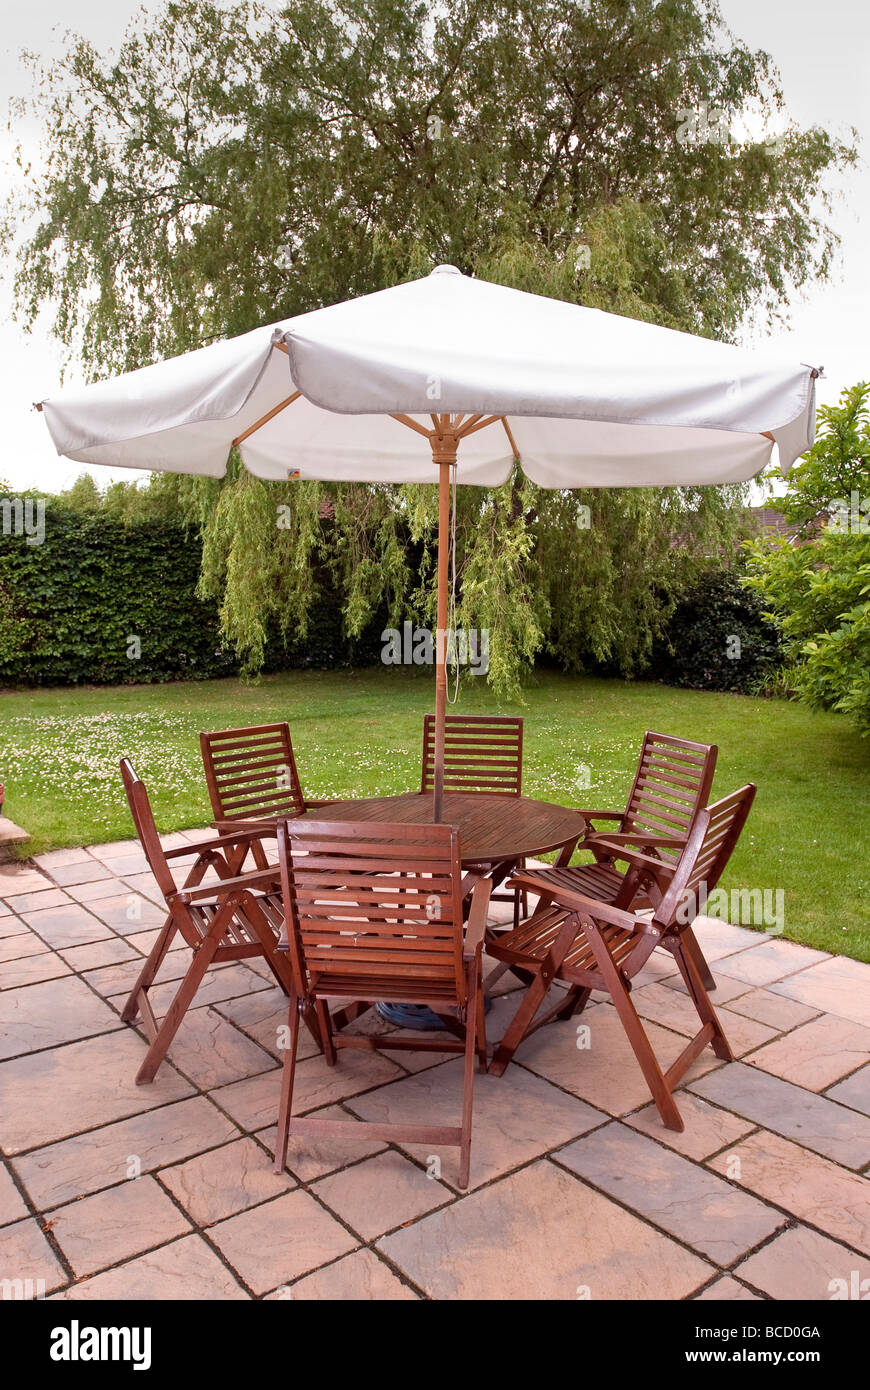 outdoor table with chairs and umbrella